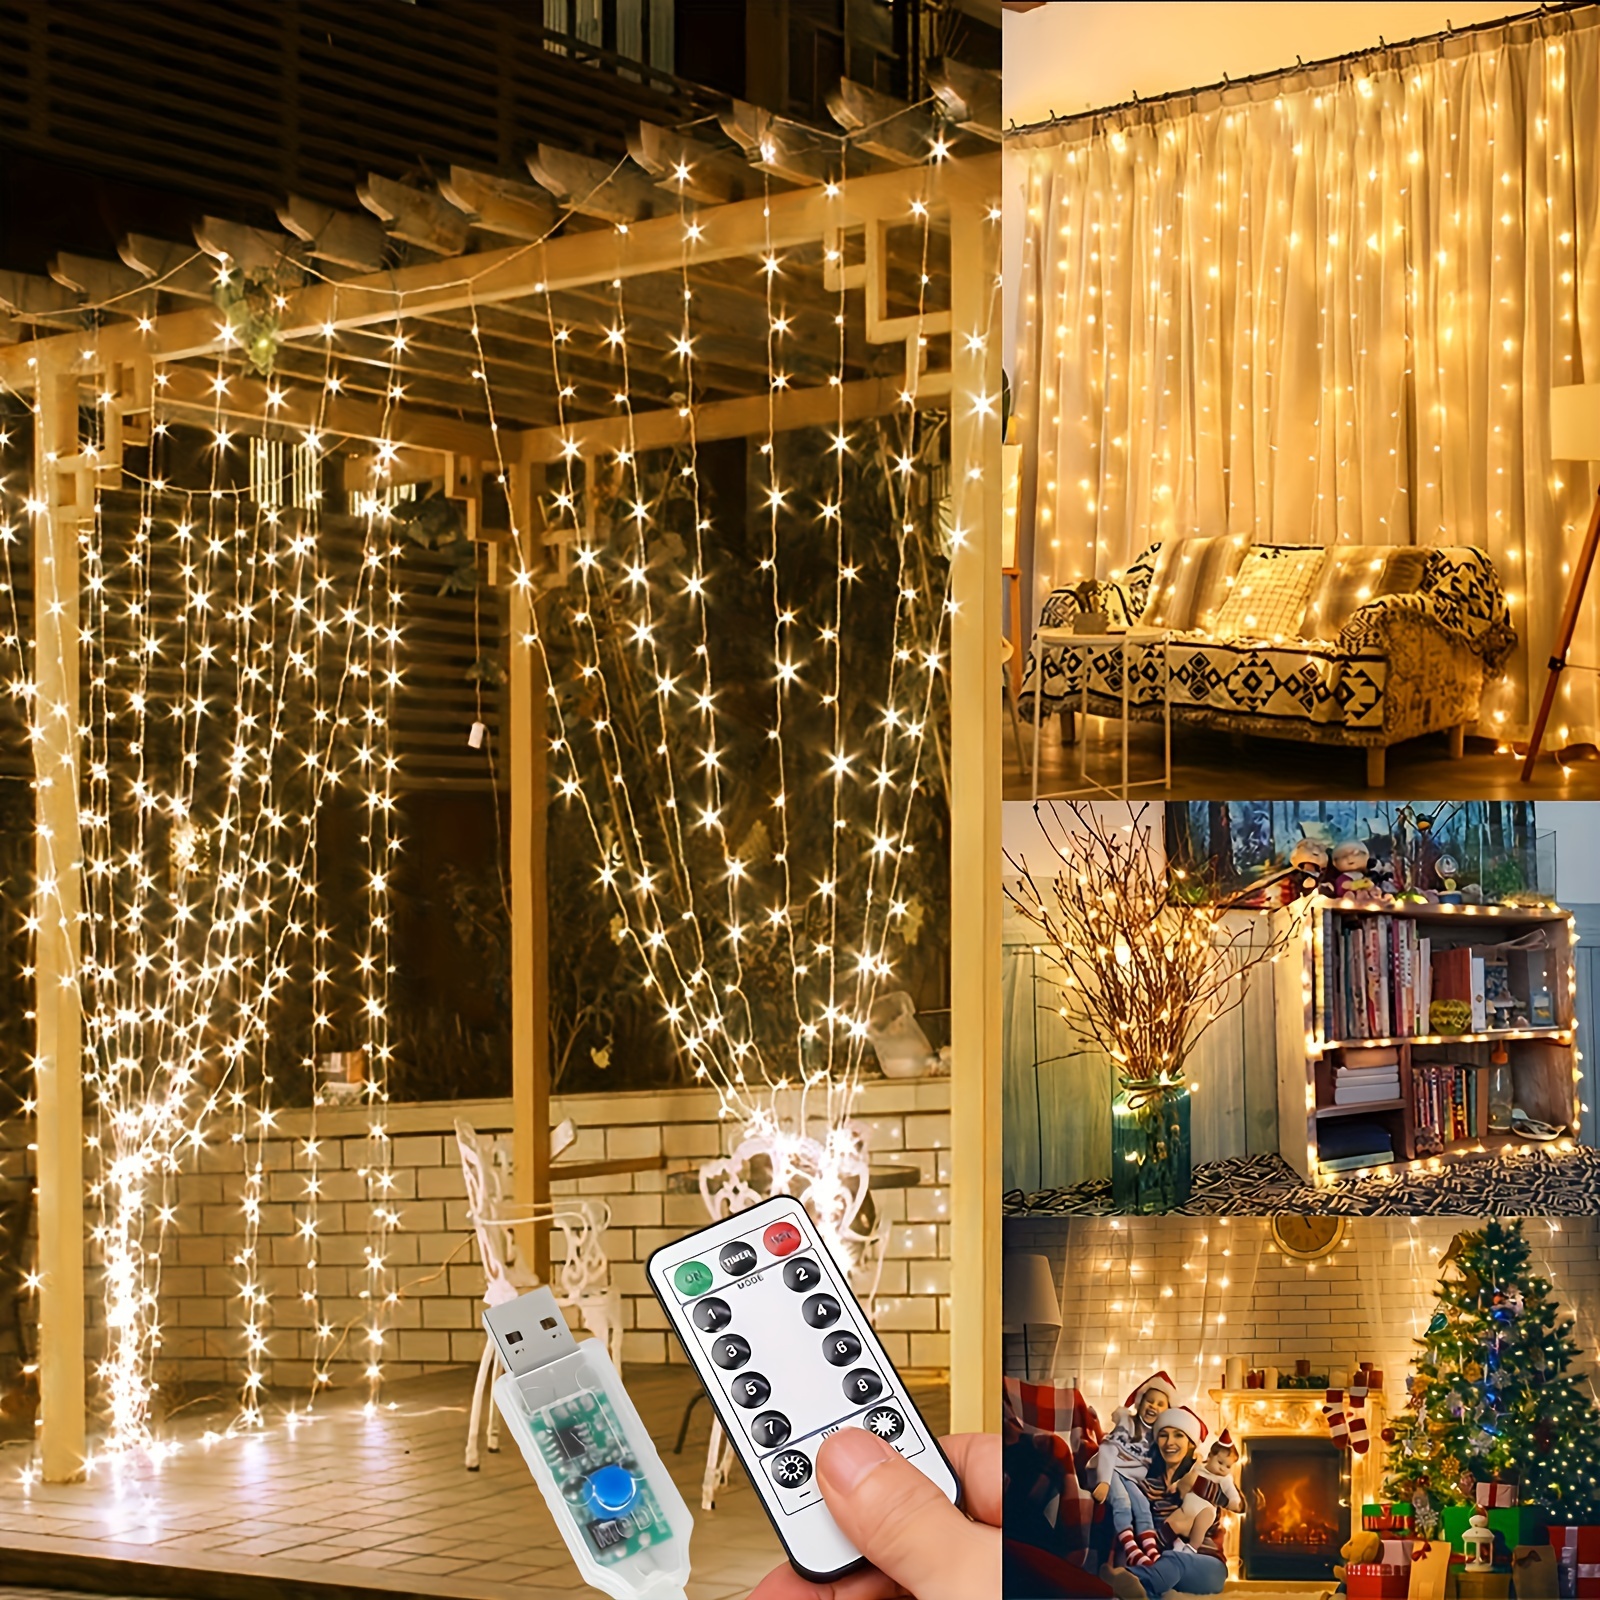 

Decorative Light Curtain, 118.11x118.11in 300 Led Light Curtain, 8 Modes Led Light Curtain Lights, For Indoor, Bedroom, Outdoor Decoration, Balcony, Warm White